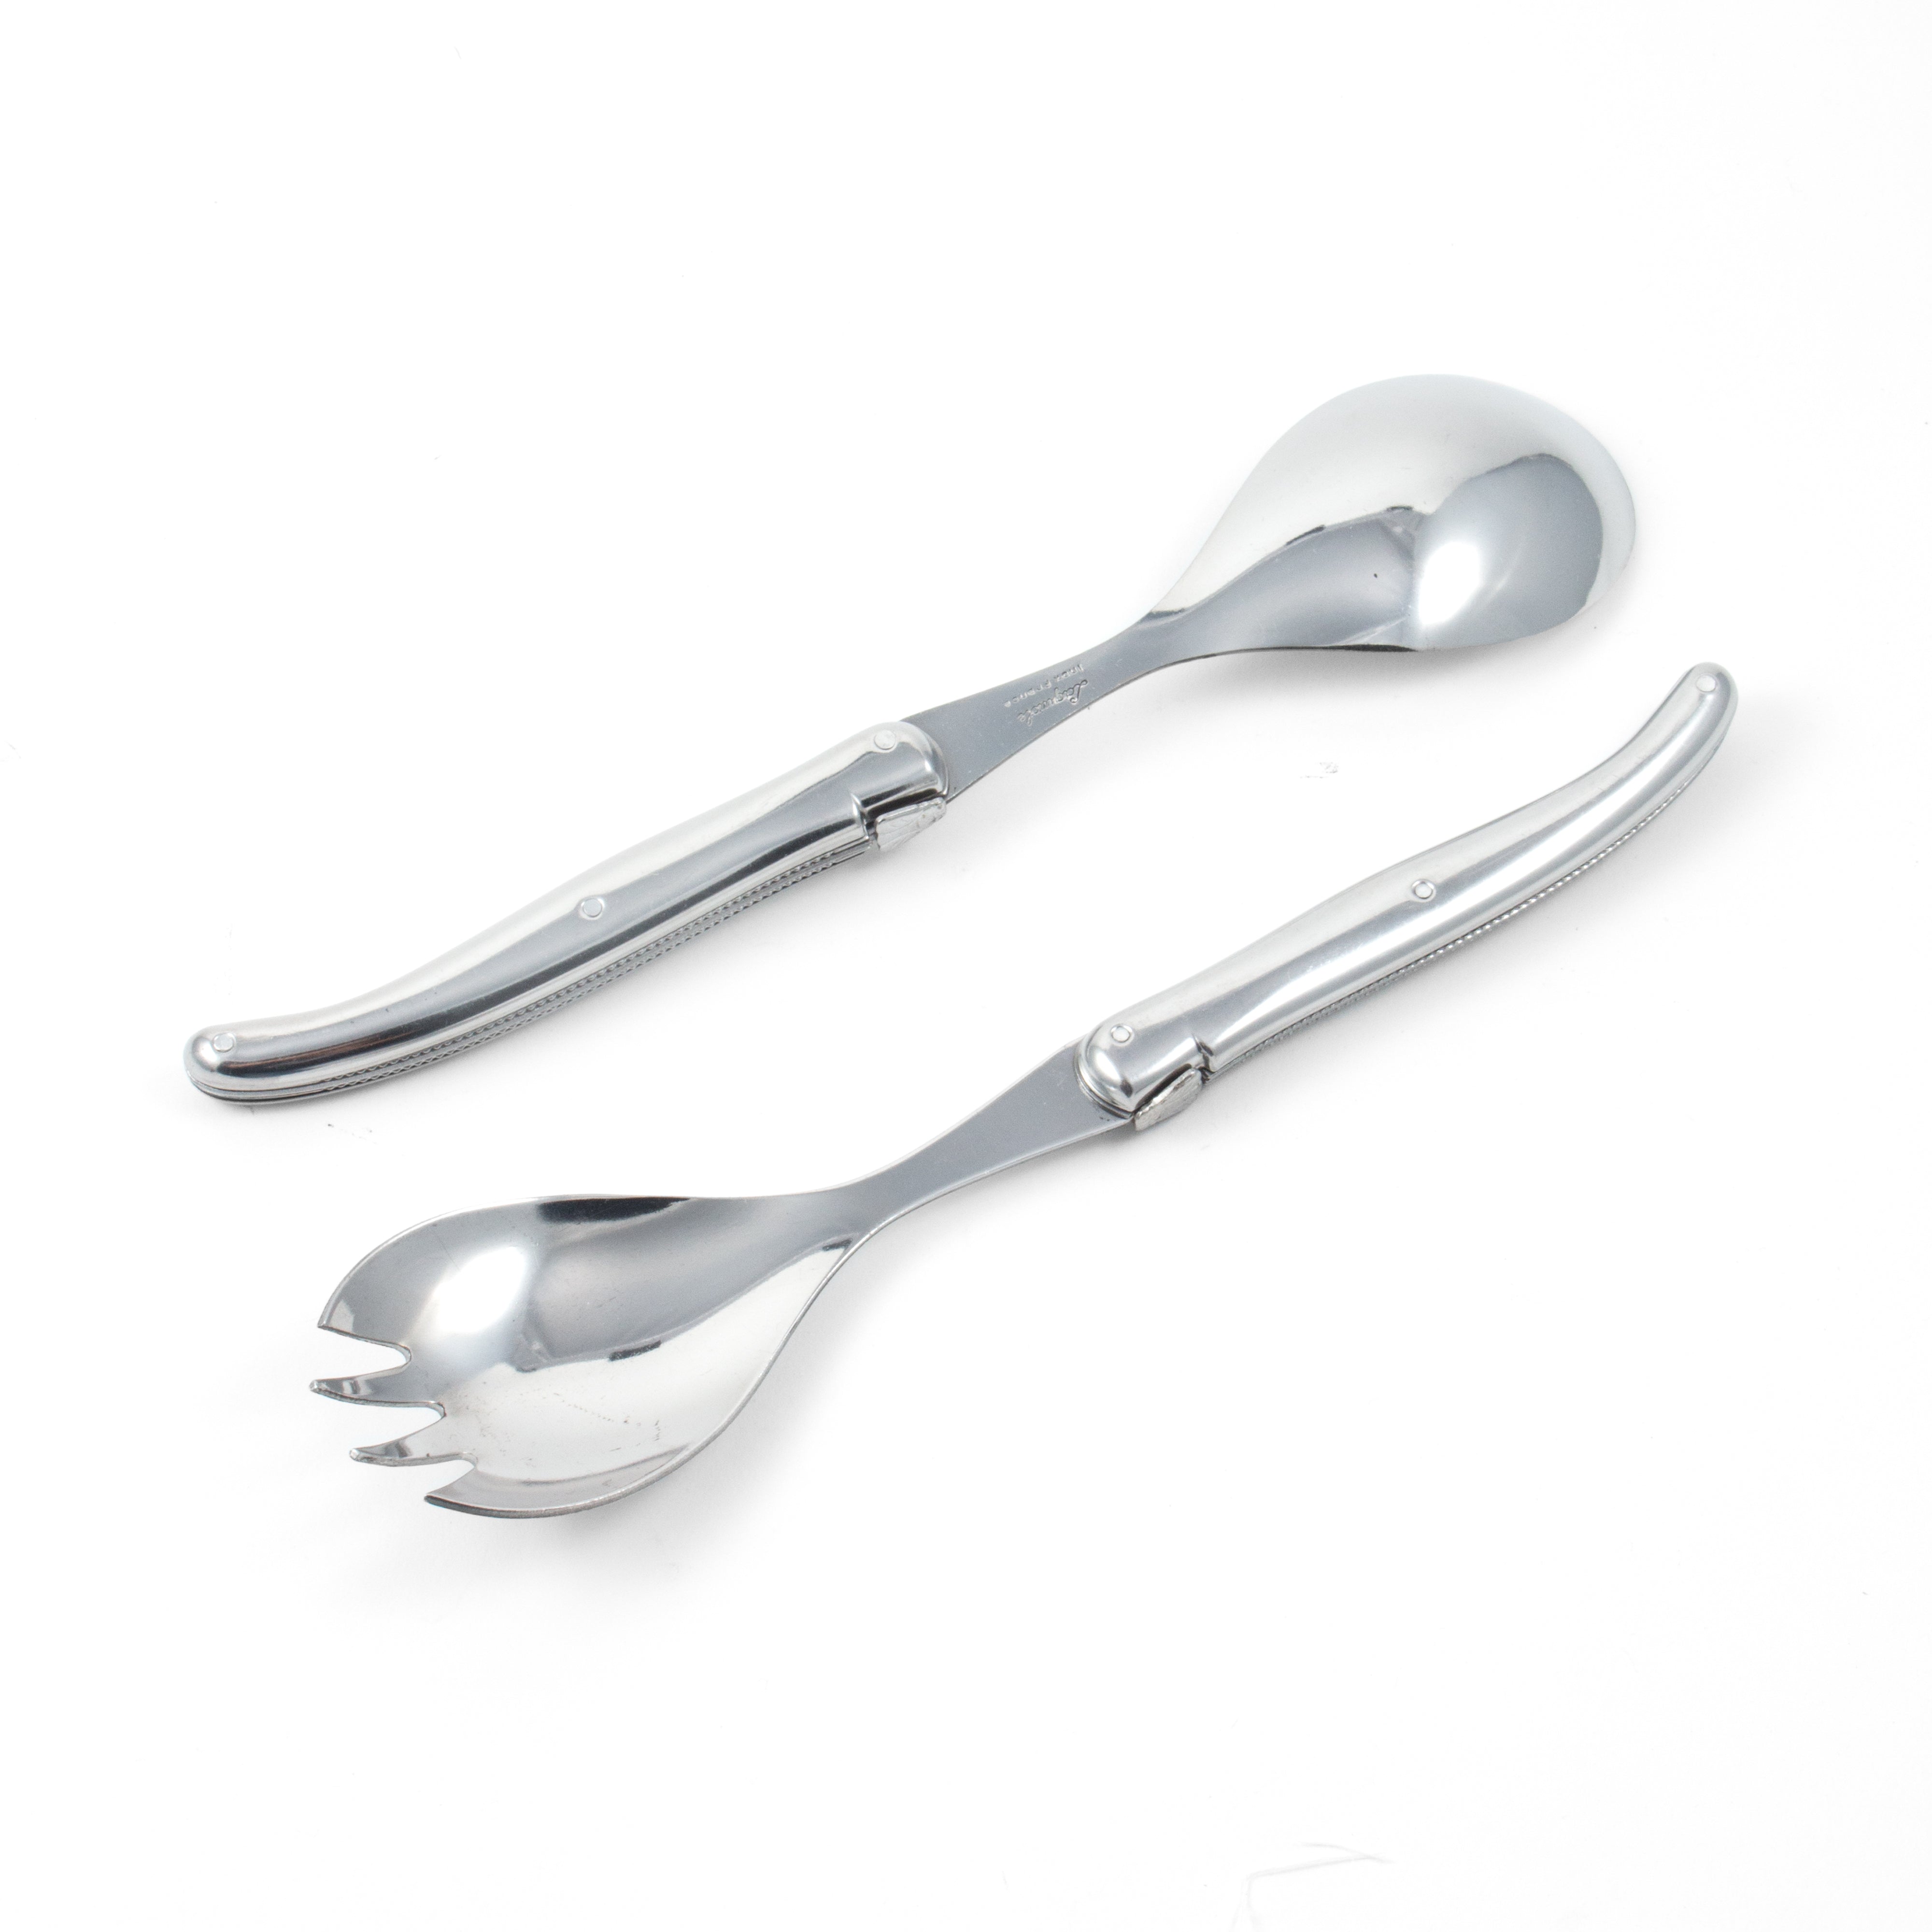 Laguiole Platine Salad Serving Set Stainless Steel in Wood Box (Set of 2) Cutlery Set Laguiole Brand_Laguiole Cheese Sets Kitchen_Dinnerware Laguiole Loose Mini Rainbow Utensils Laguiole_Servers_S_2_-_Stainless_Steel_out_of_box